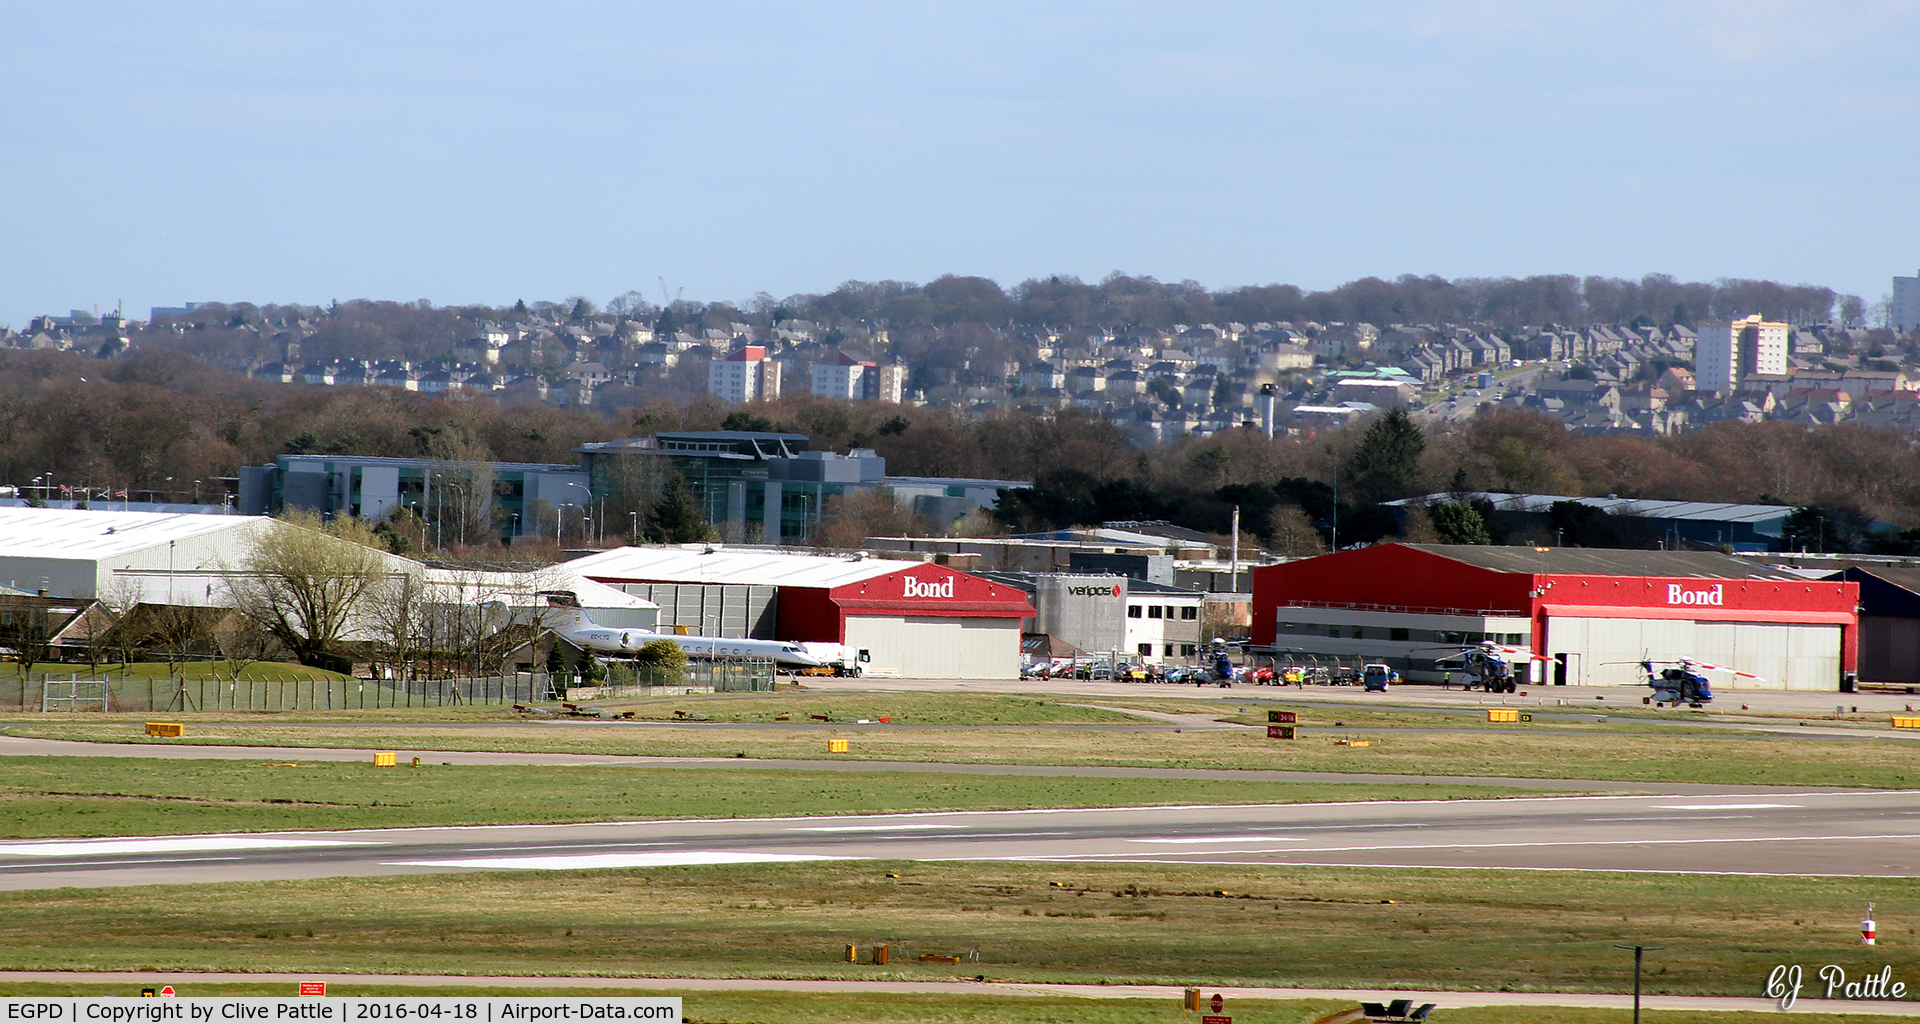 Aberdeen Airport, Aberdeen, Scotland United Kingdom (EGPD) - Bond Helicopters hangars at Aberdeen EGPD - with GA park on left of apron.